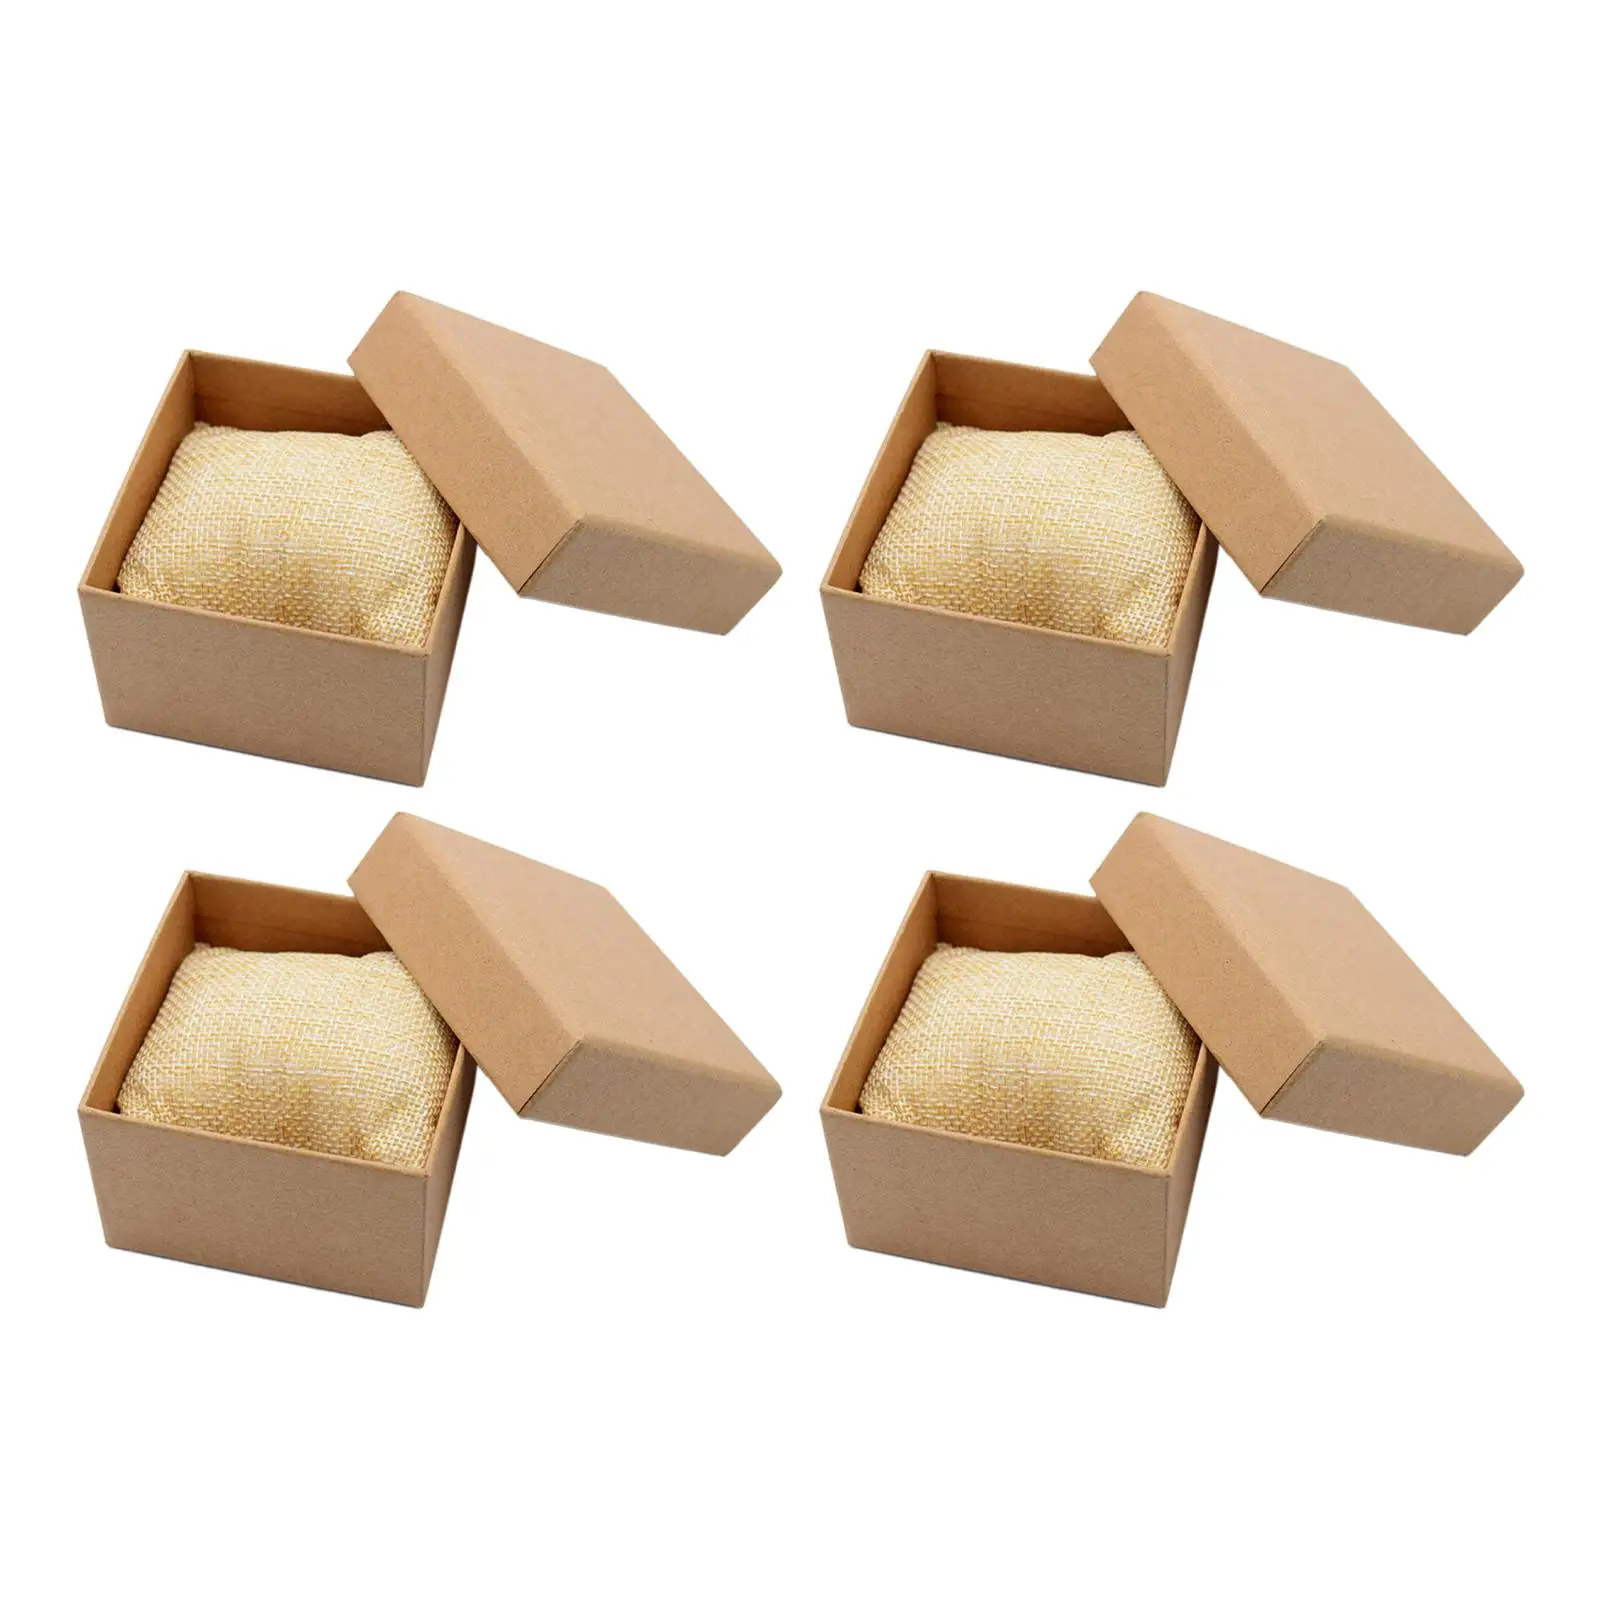 4 Pieces Kraft Watch Box with Pillow Single Protective Gifts Trinkets Packing Box Jewelry Display Case Storage Case Holder